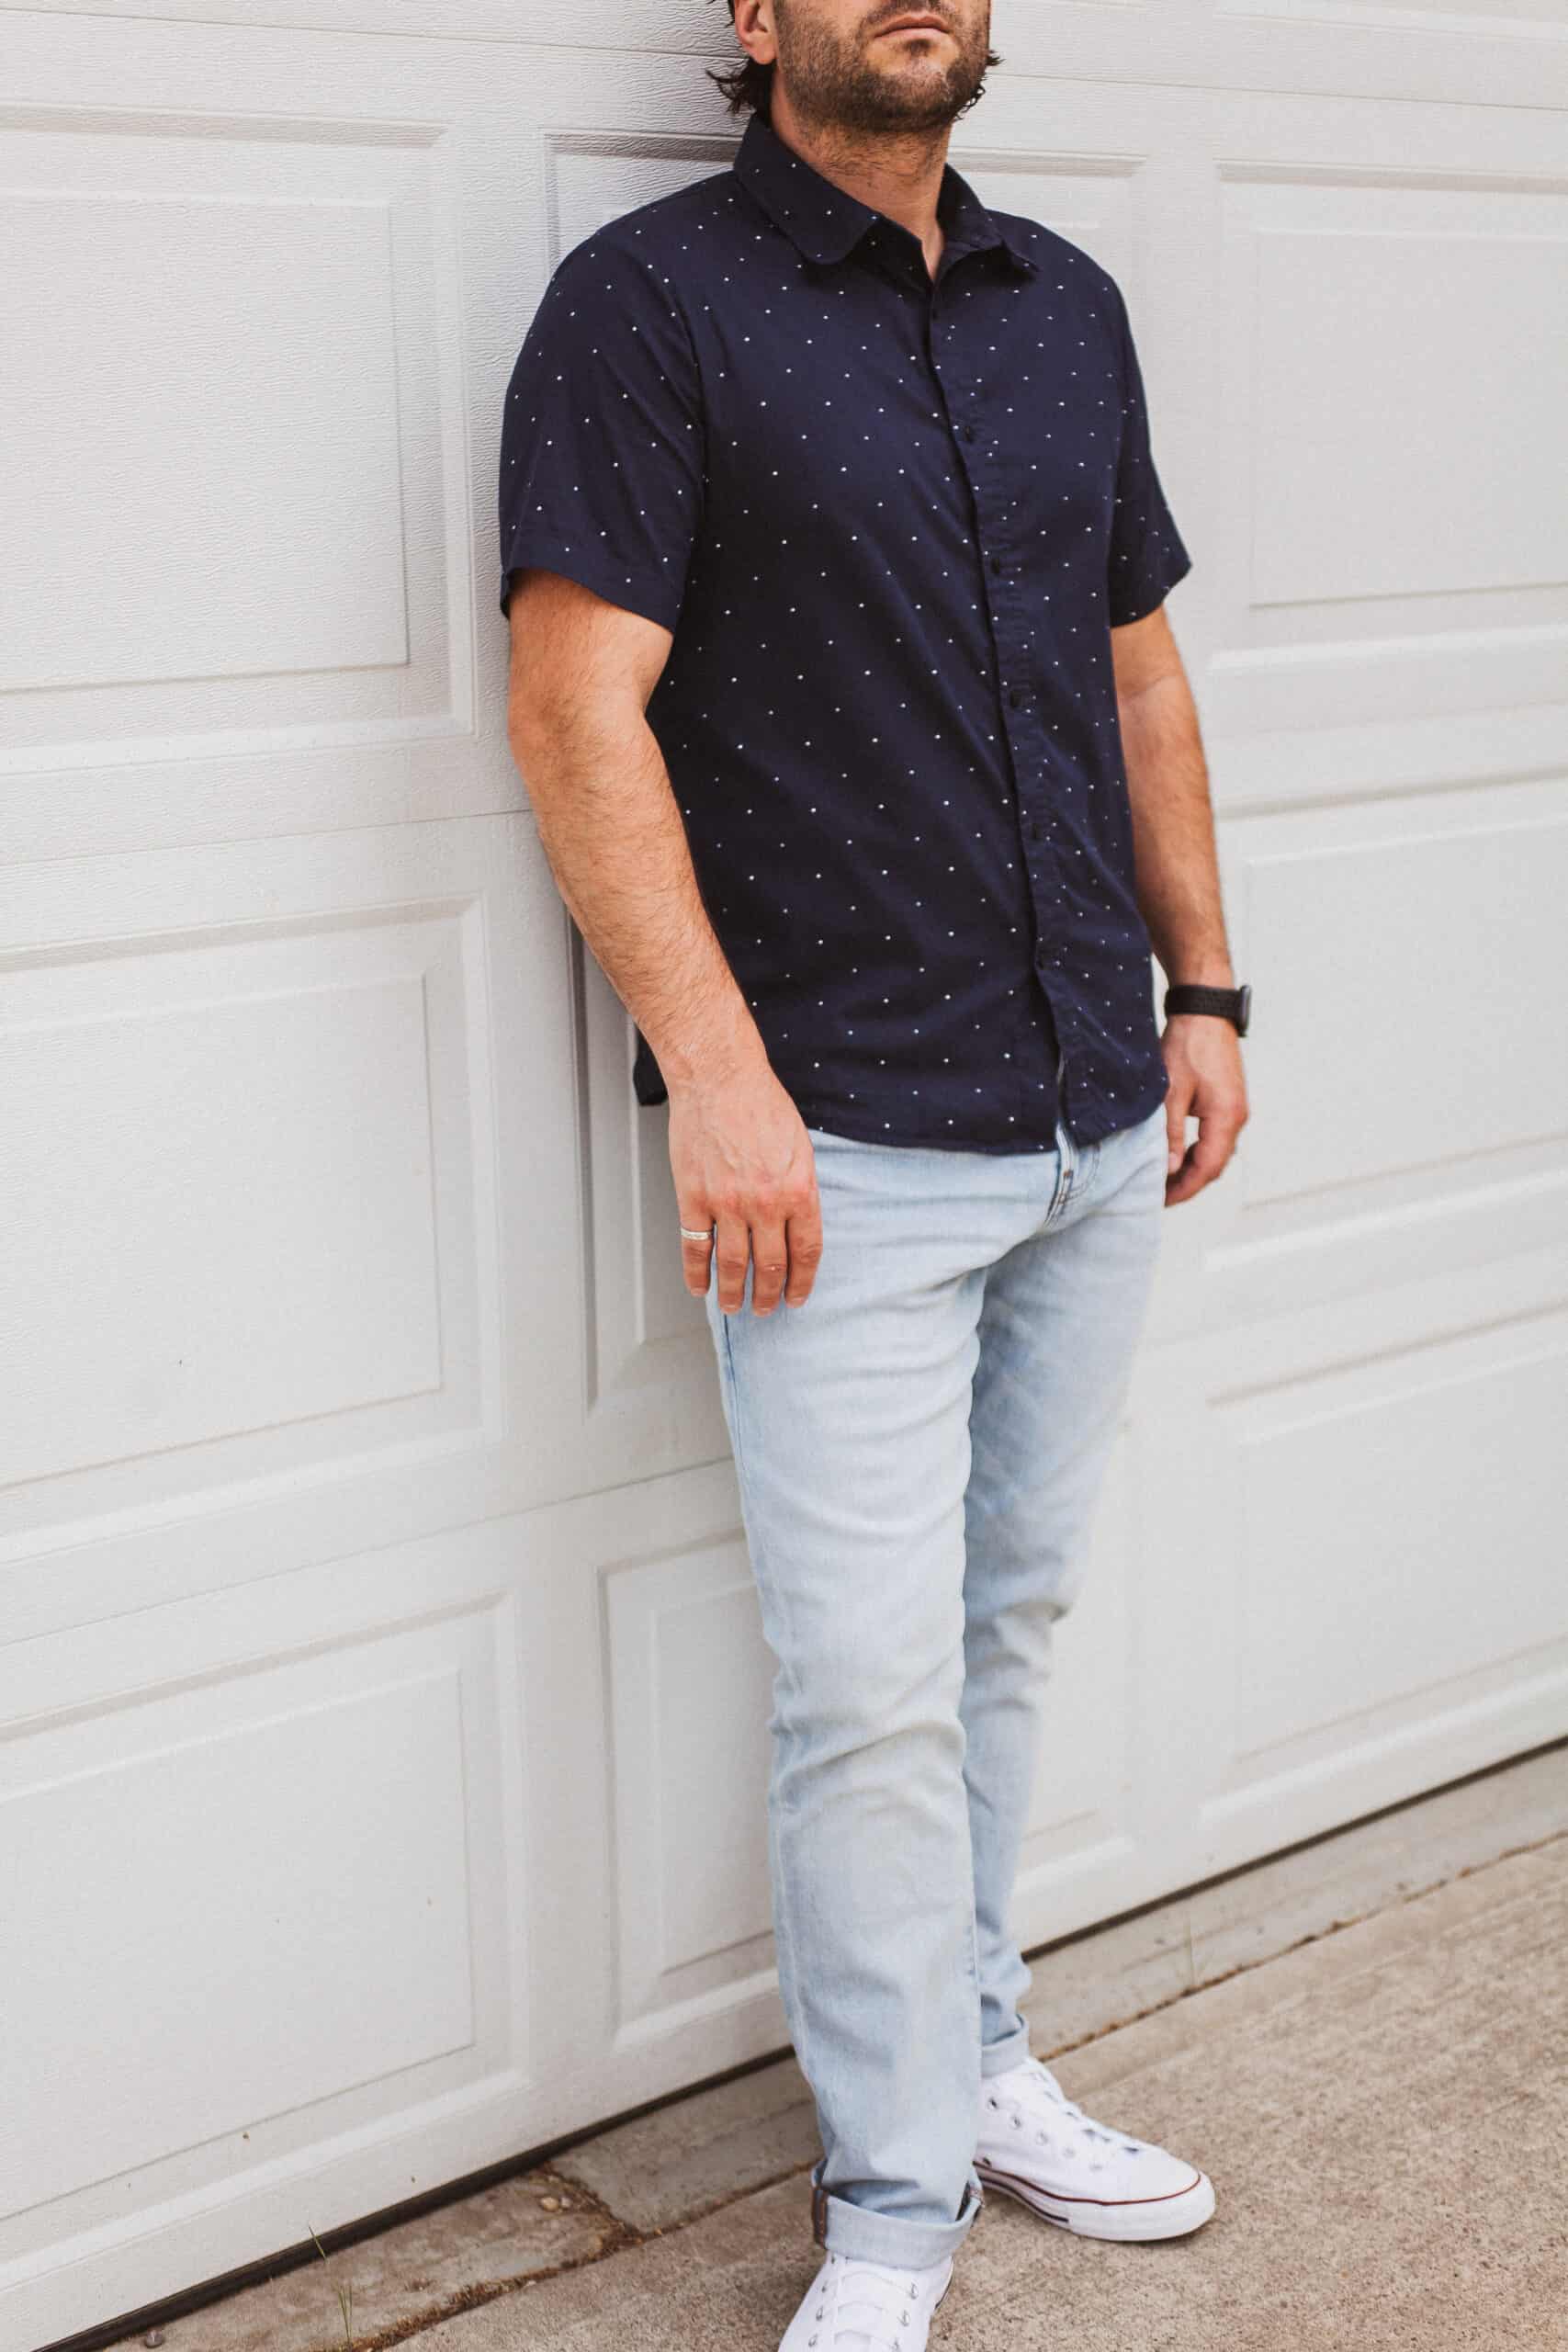 image of a man leaning against a white garage door wearing a navy blue button-up short sleeve shirt, light blue jeans, and white sneakers 